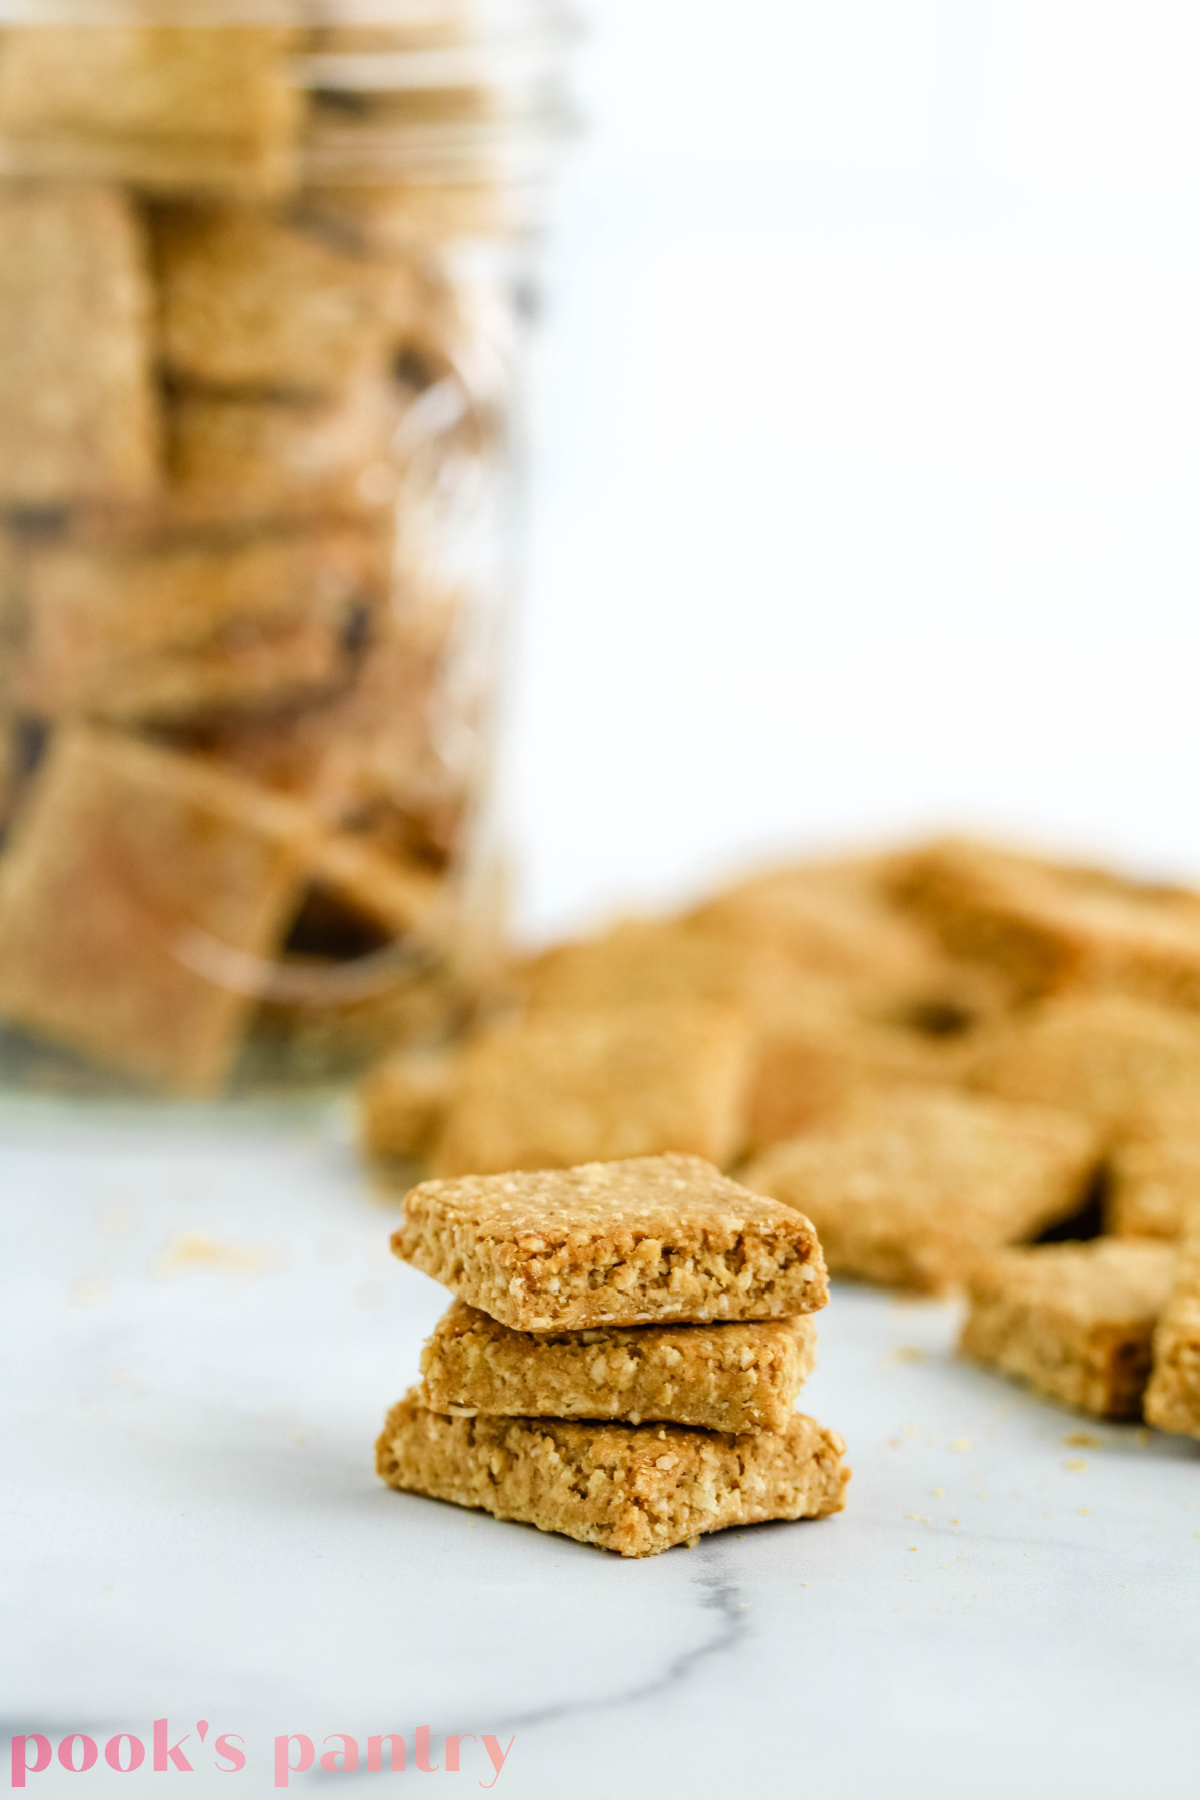 Peanut butter training treats for dogs